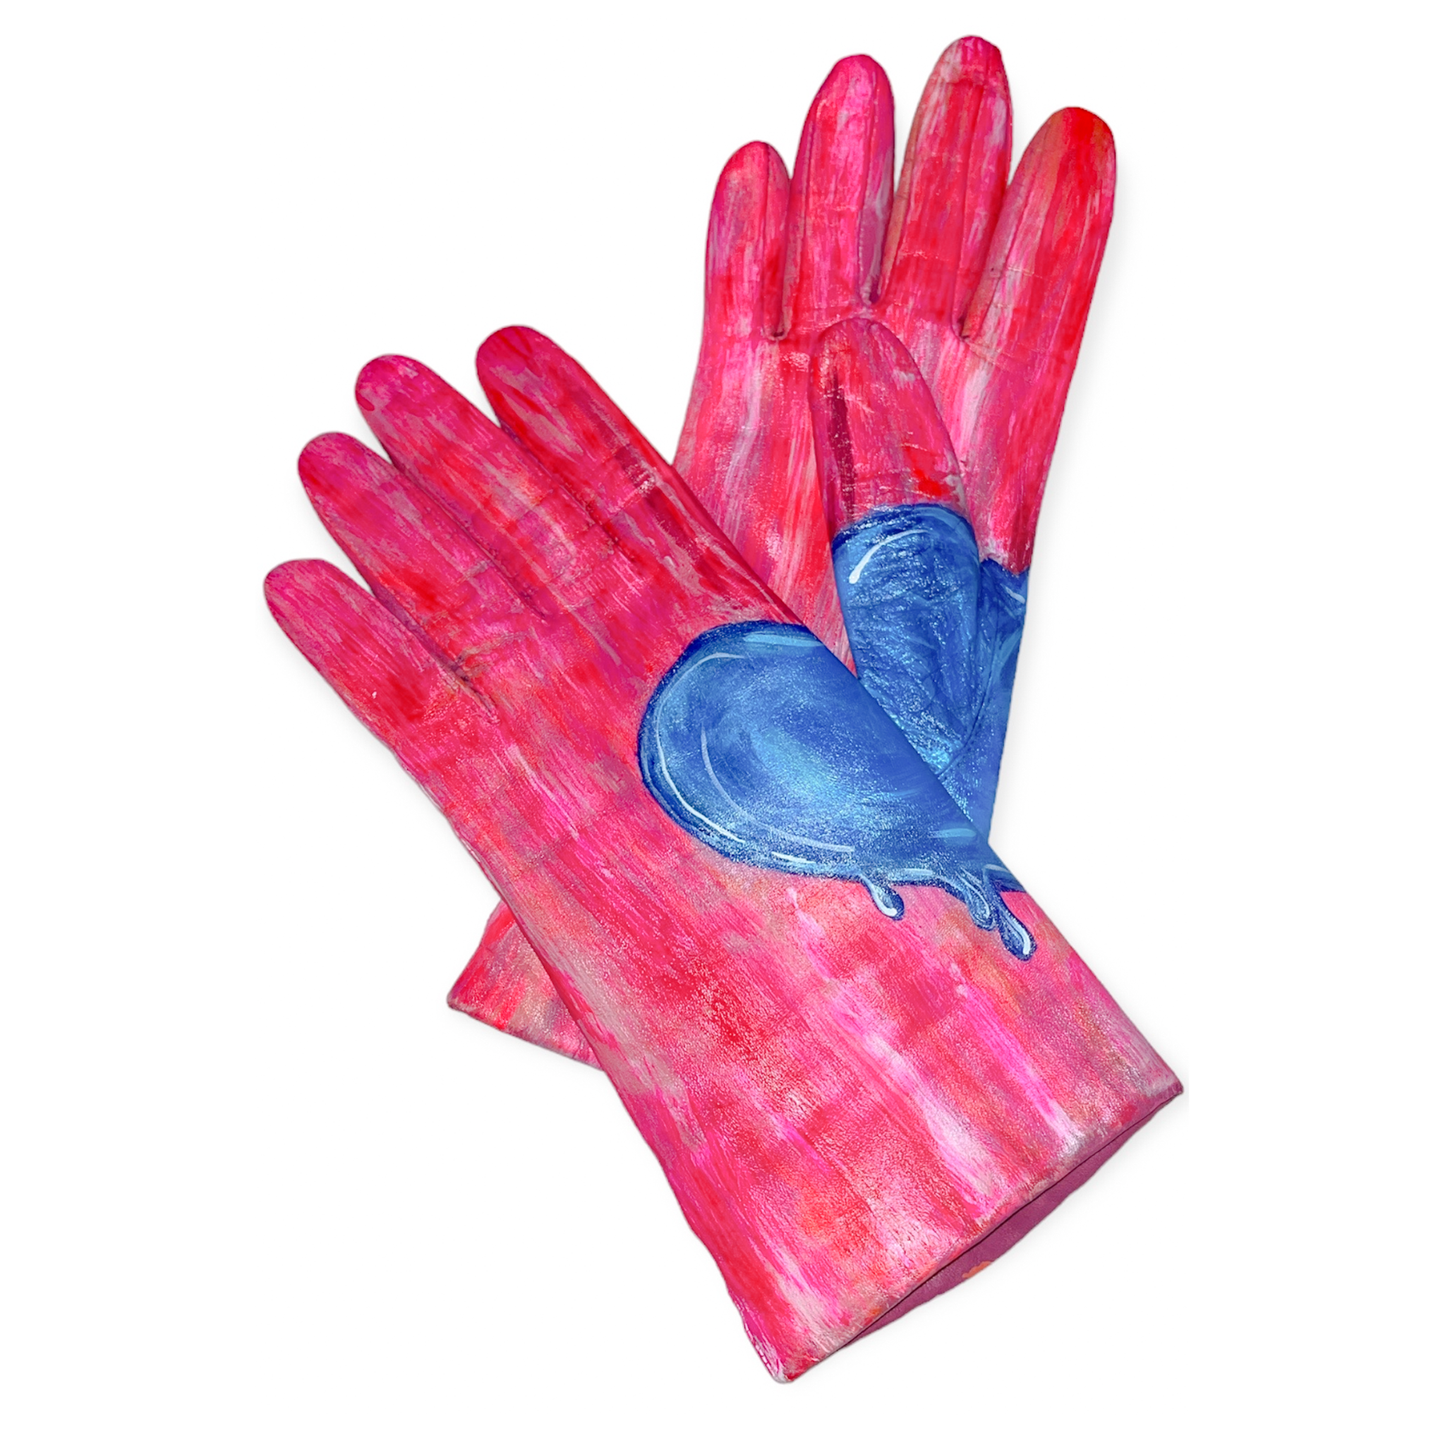 "Cold Hearted" - Up-cycled Leather Gloves - Hand Painted by Skye De La Rosa